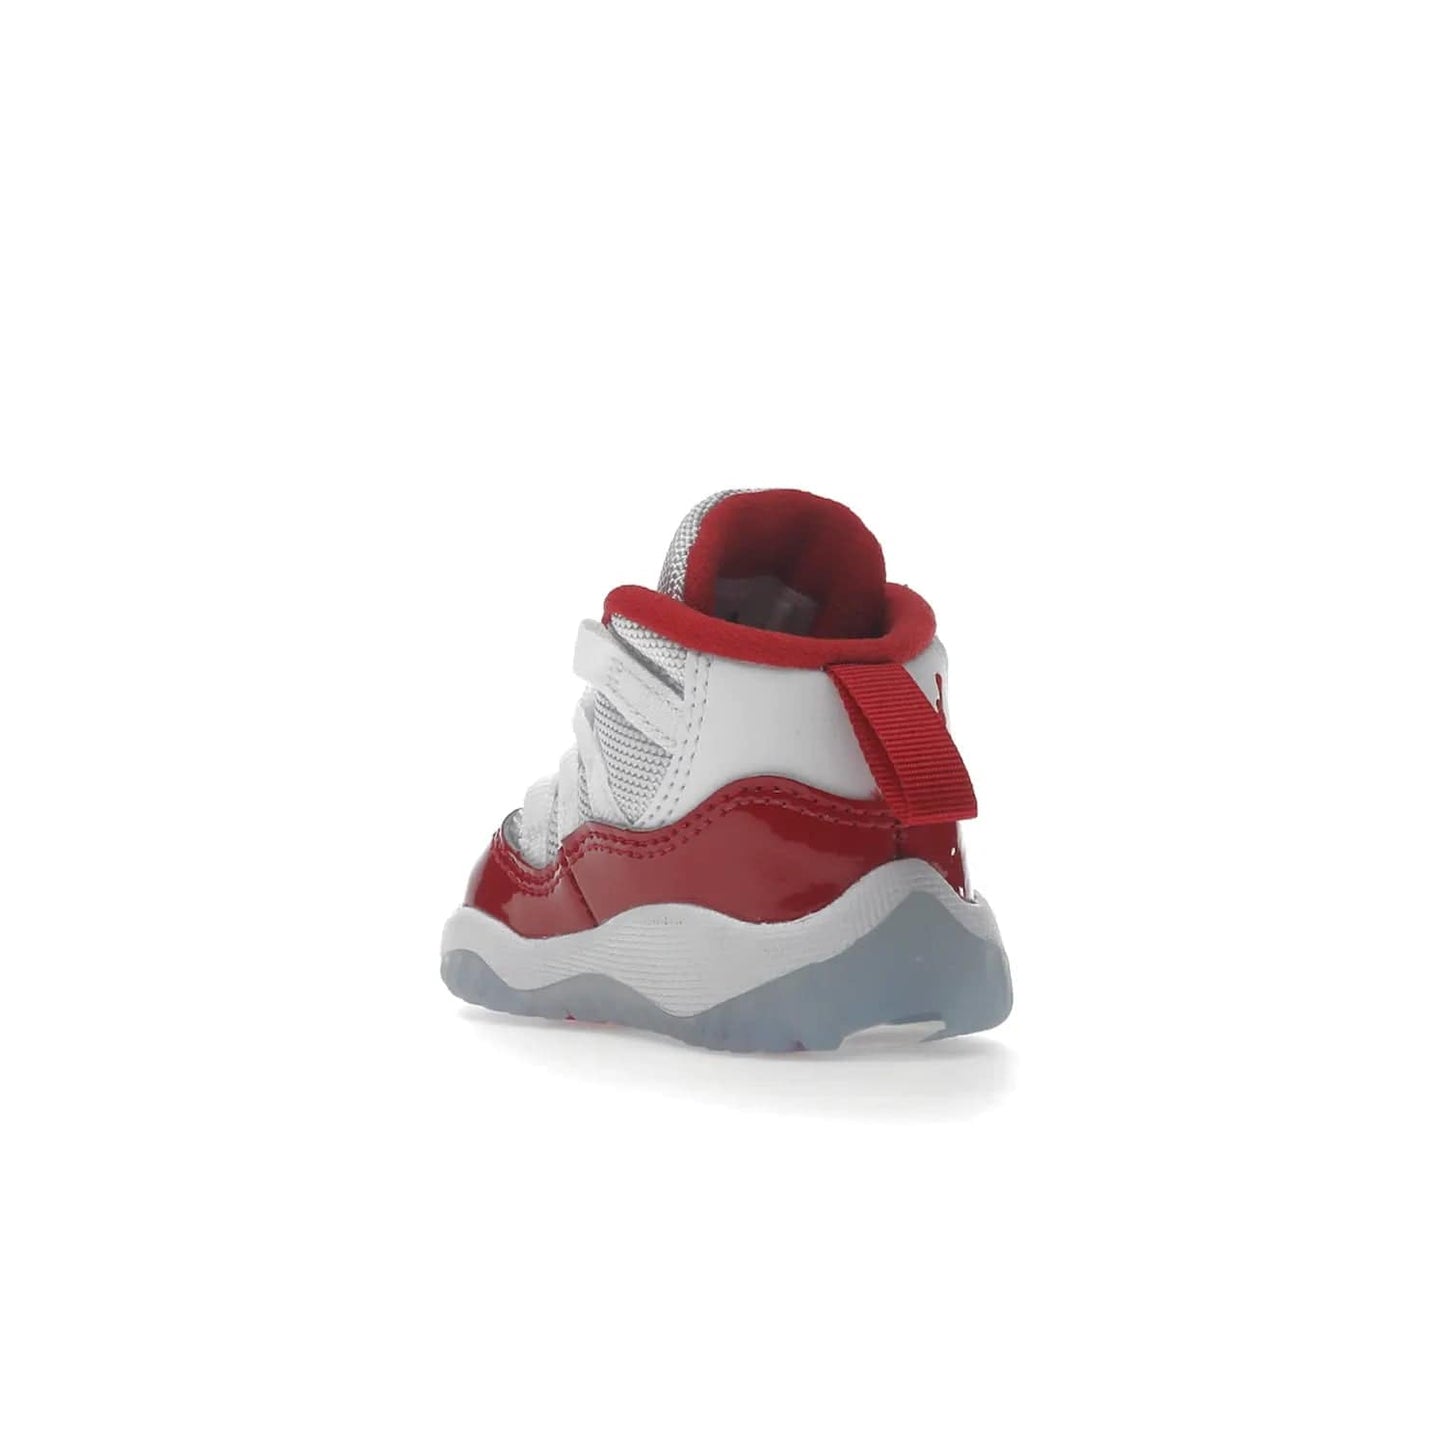 Jordan 11 Retro Cherry (2022) (TD) - Image 25 - Only at www.BallersClubKickz.com - Timeless classic. Air Jordan 11 Retro Cherry 2022 TD combines mesh, leather & suede for a unique look. White upper with varsity red suede. Jumpman logo on collar & tongue. Available Dec 10th, priced at $80.